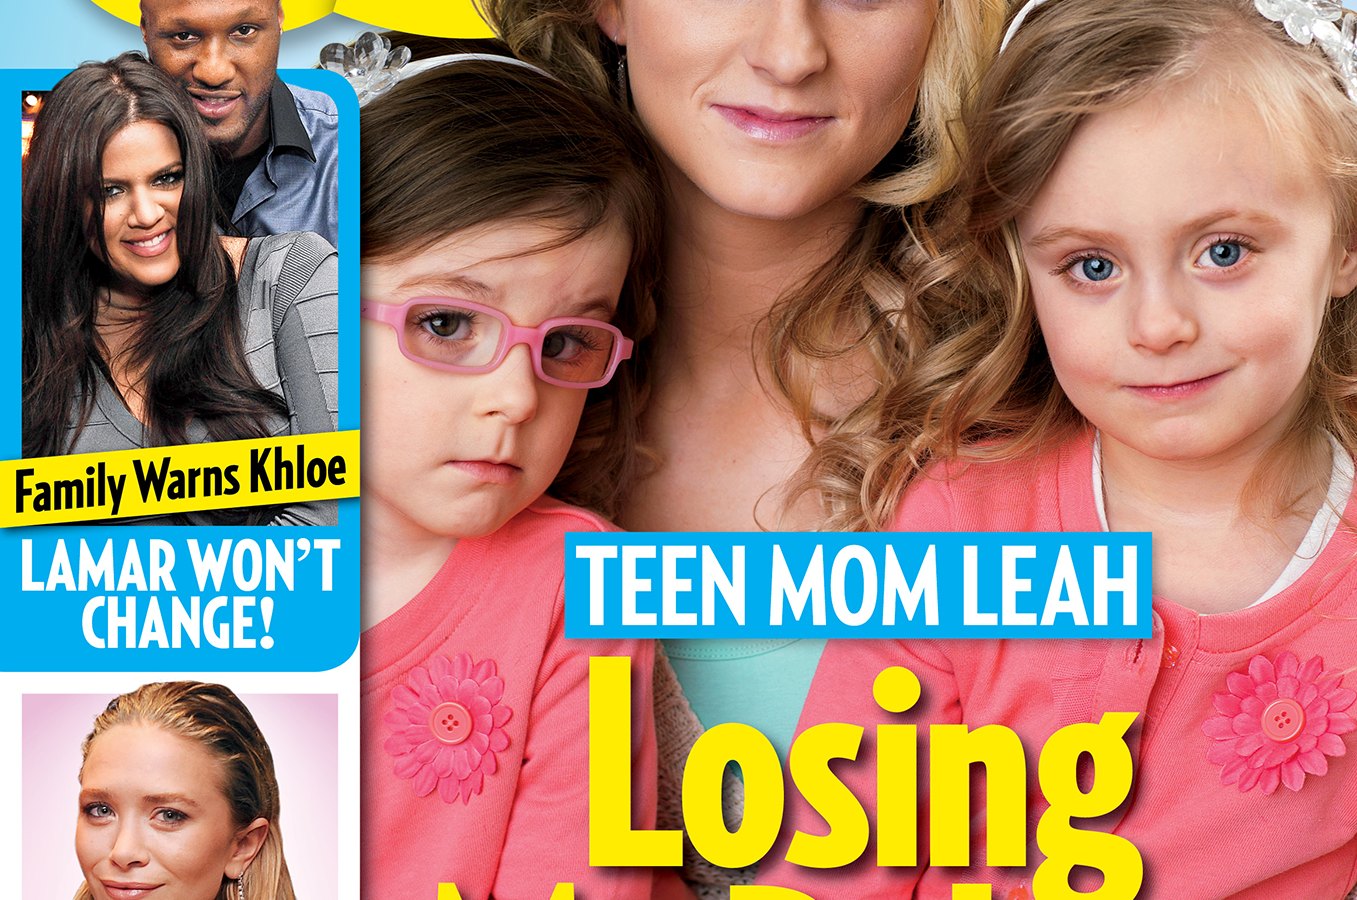 Cover tease of Leah Messer's custody mess